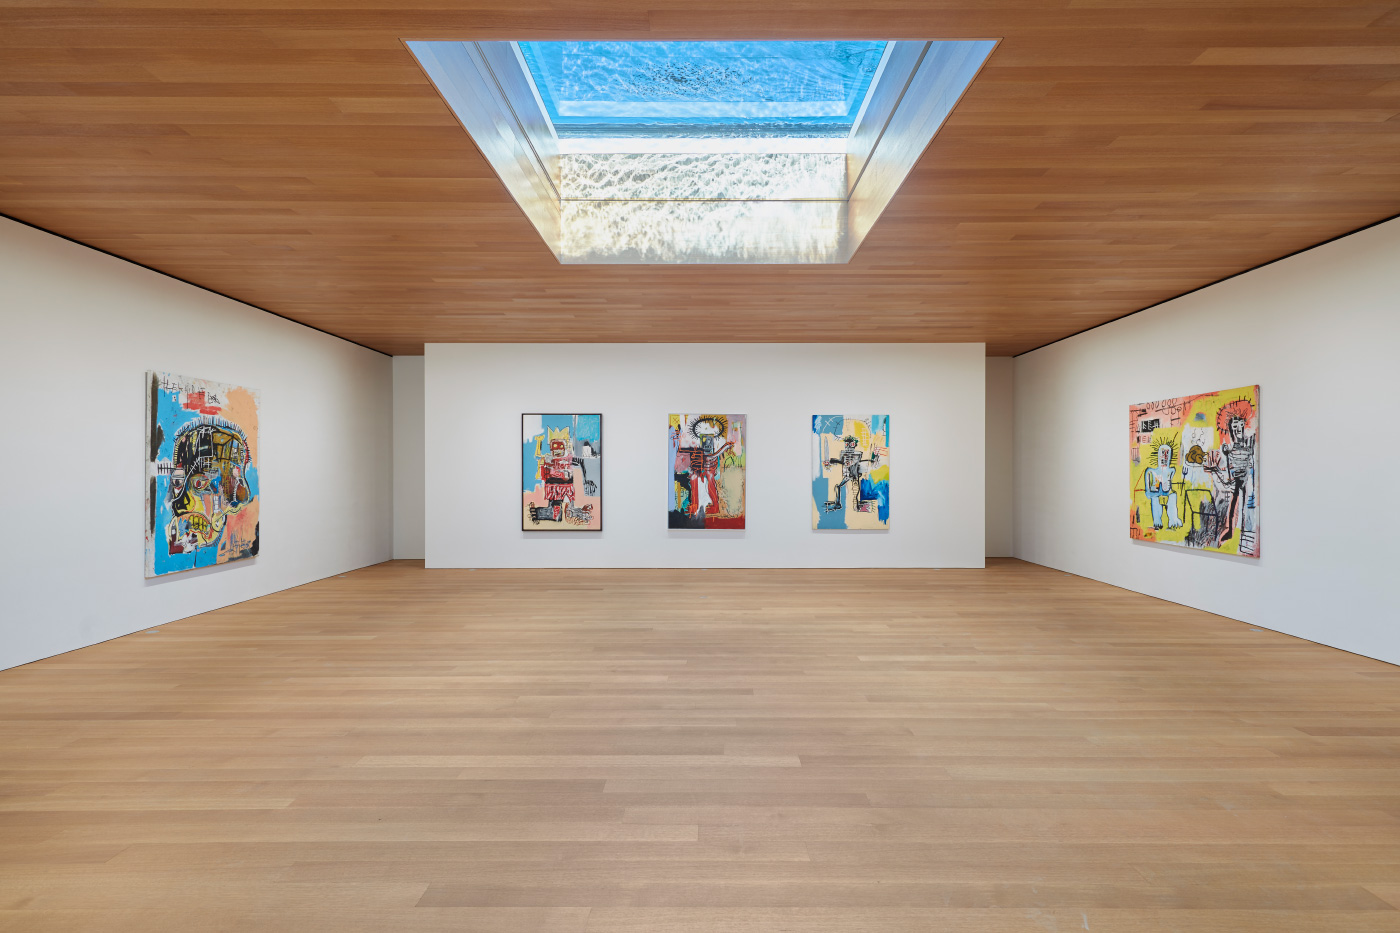 Interior photo of the Brant Foundation galleries, with an aquarium skylight distorting the light